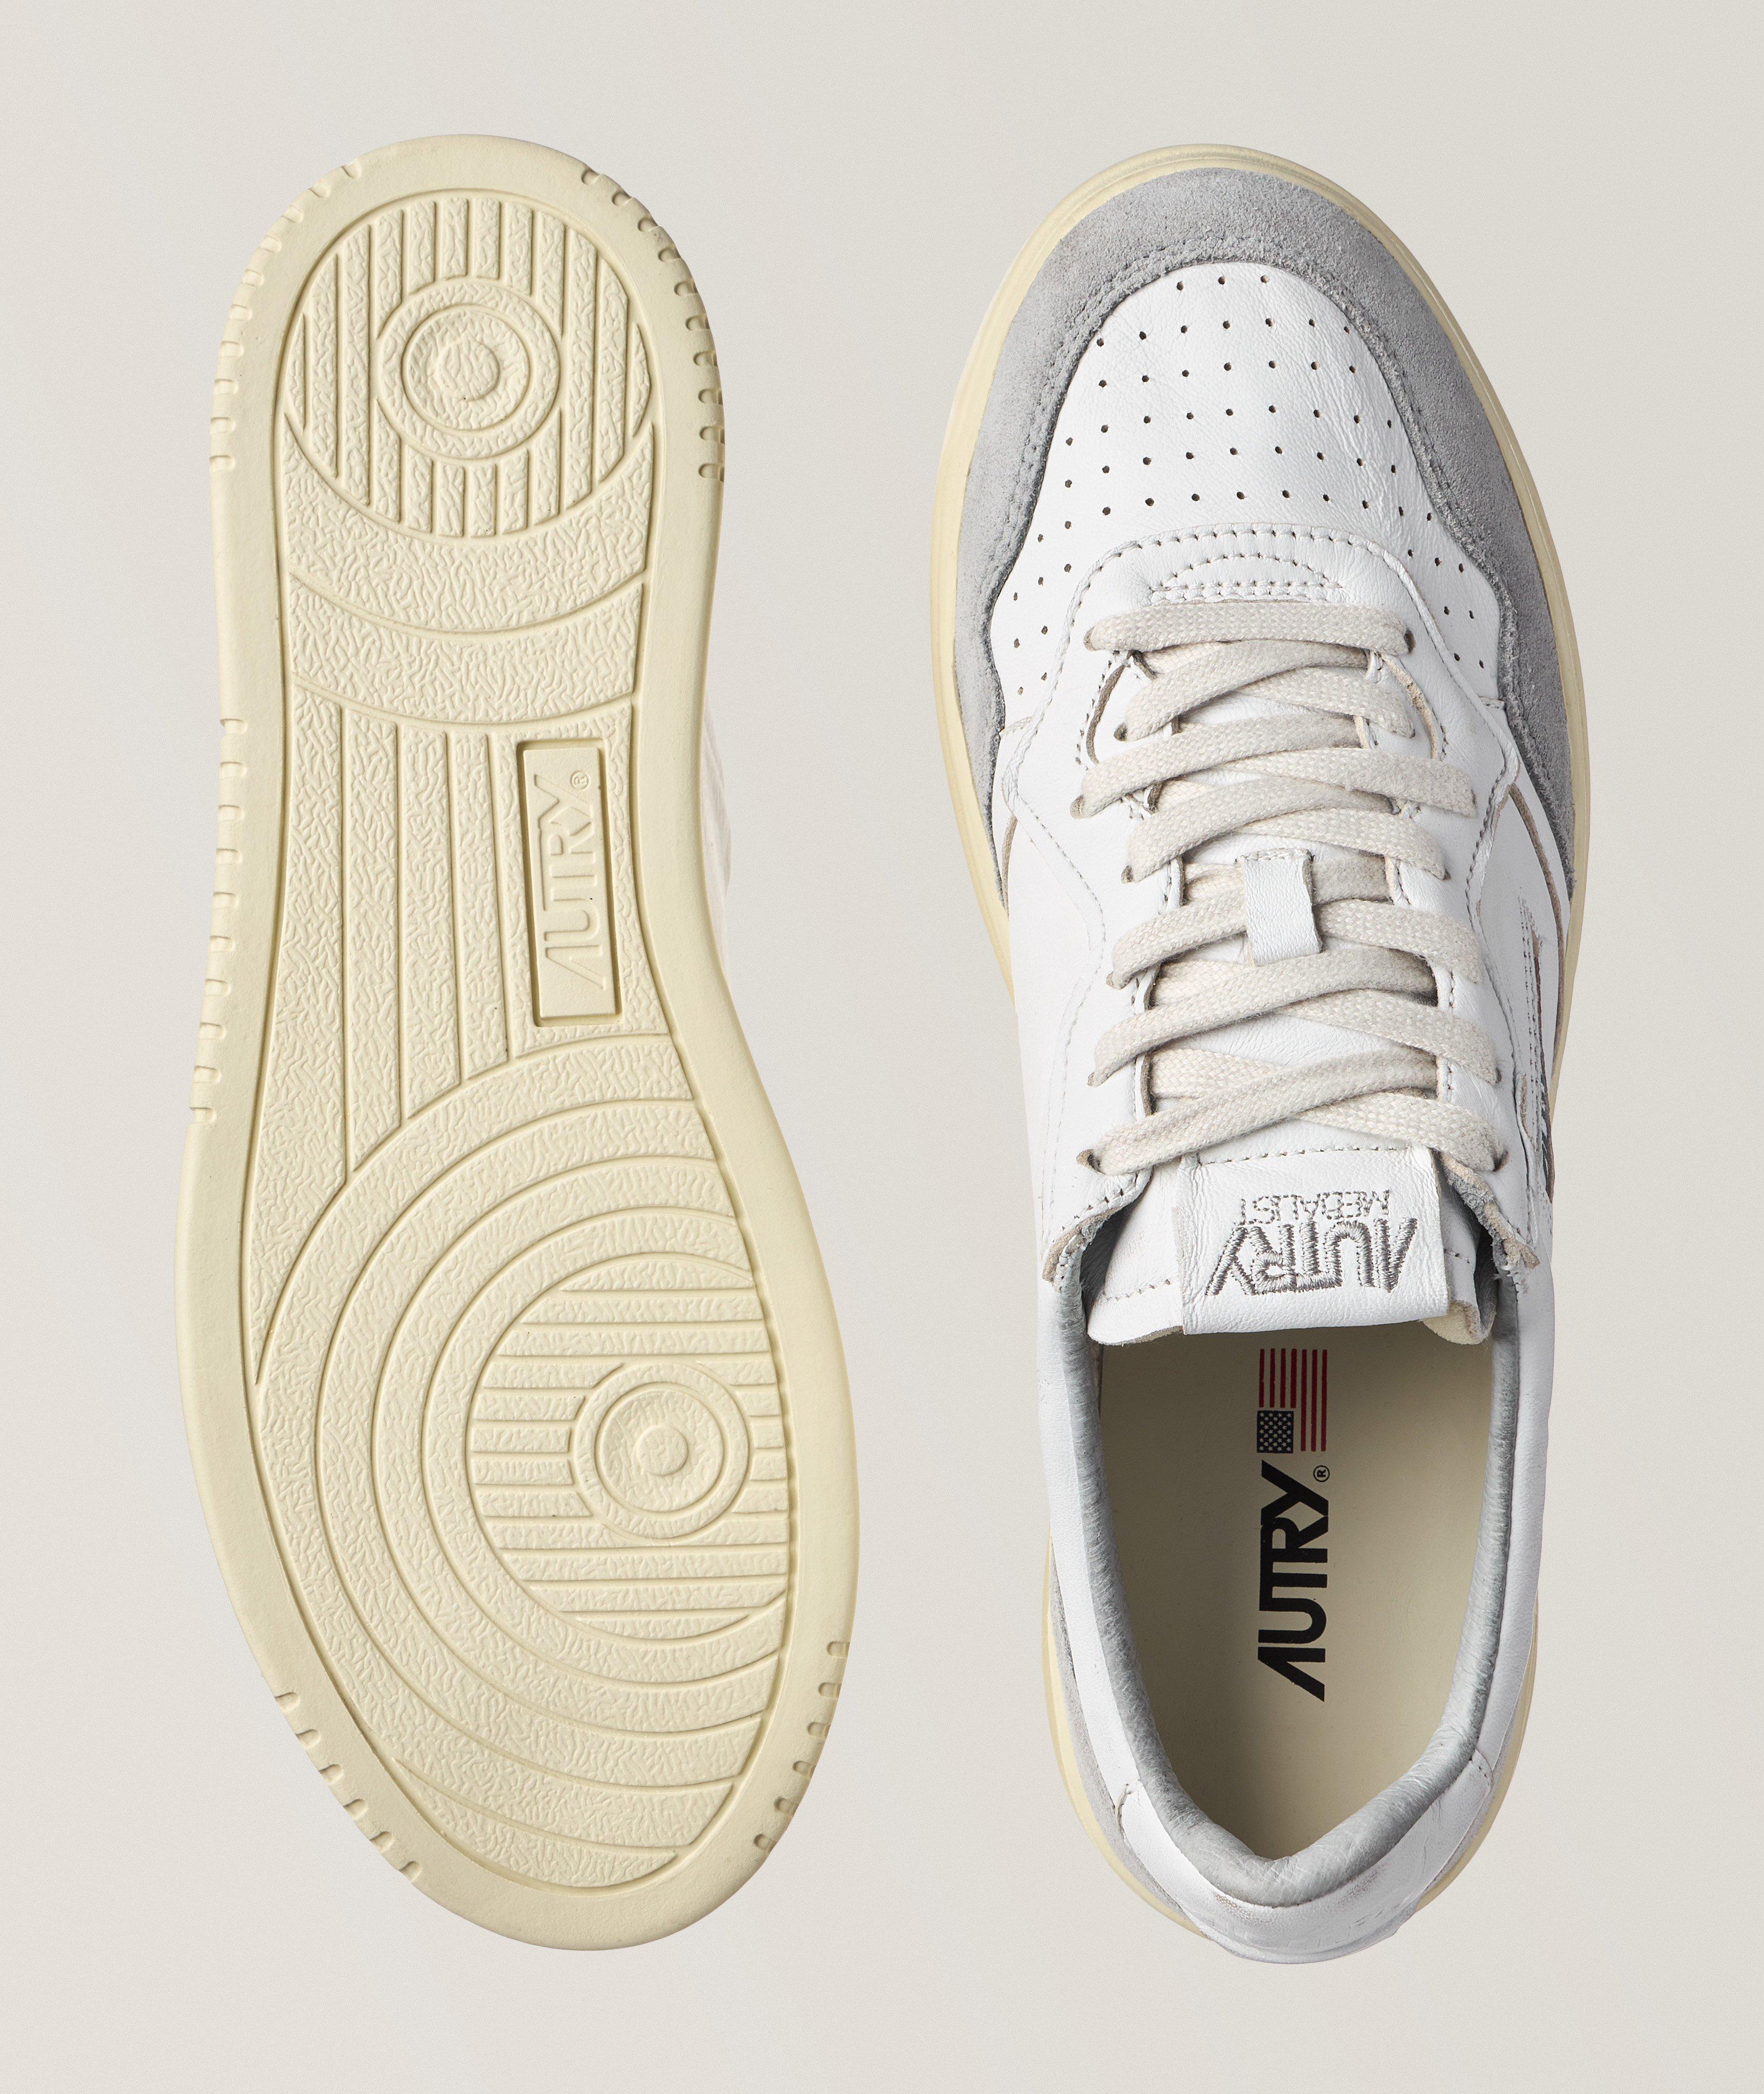 Medalist Two-Tone Washed Goatskin Sneakers image 2